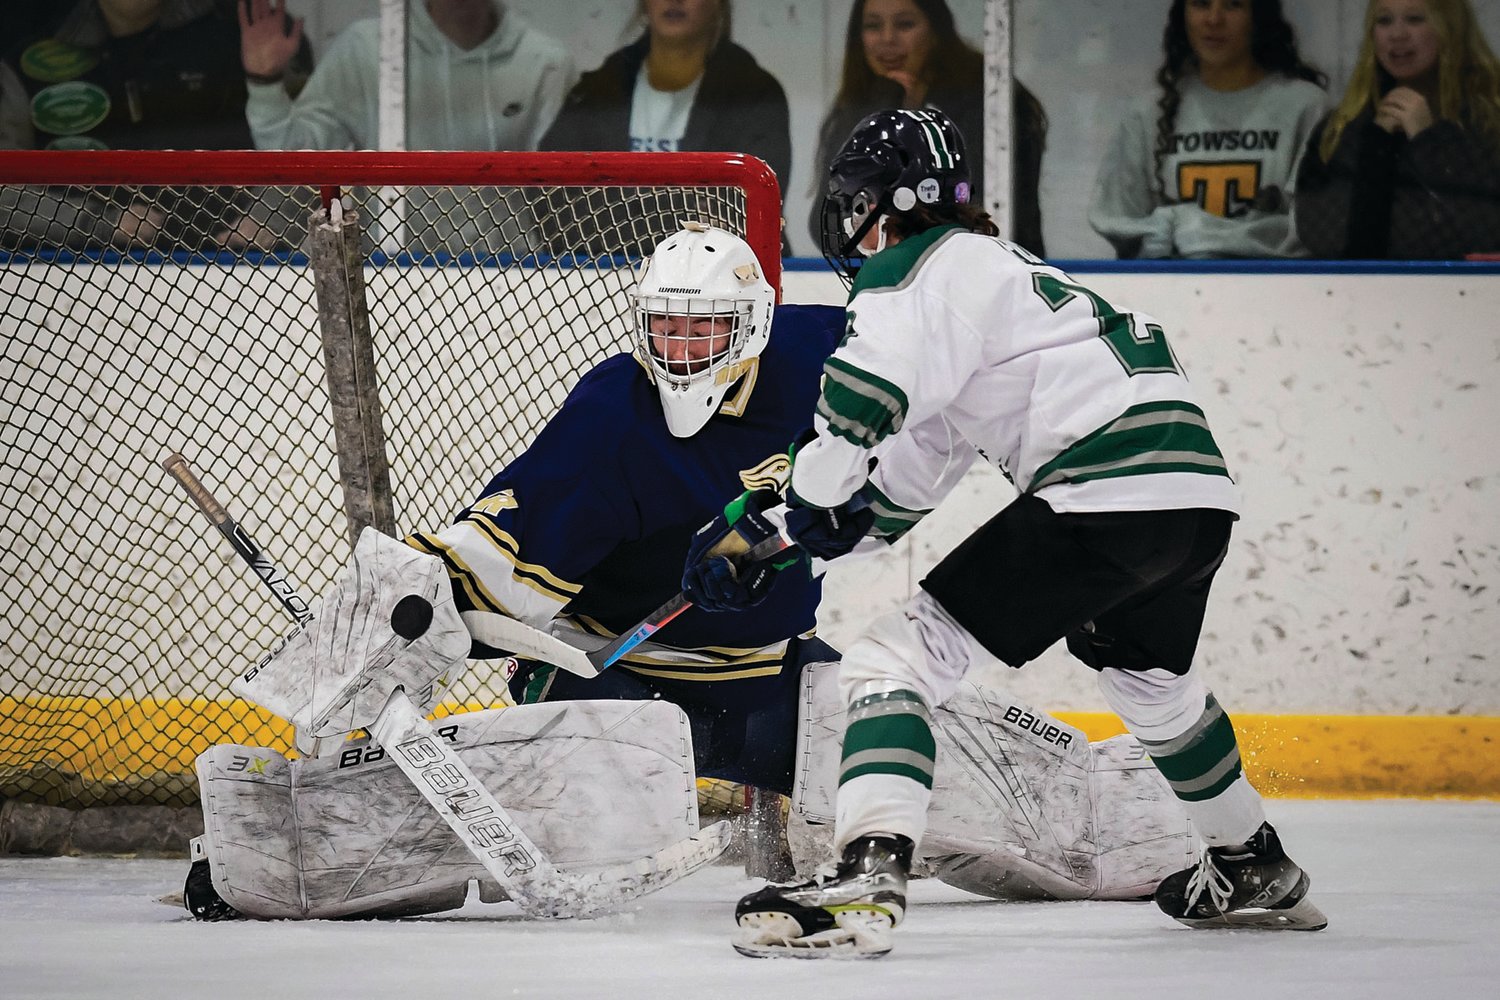 CR South goalie Carson Lopez makes a save on Pennridge’s Kevin Pico with his eyes seemingly closed.